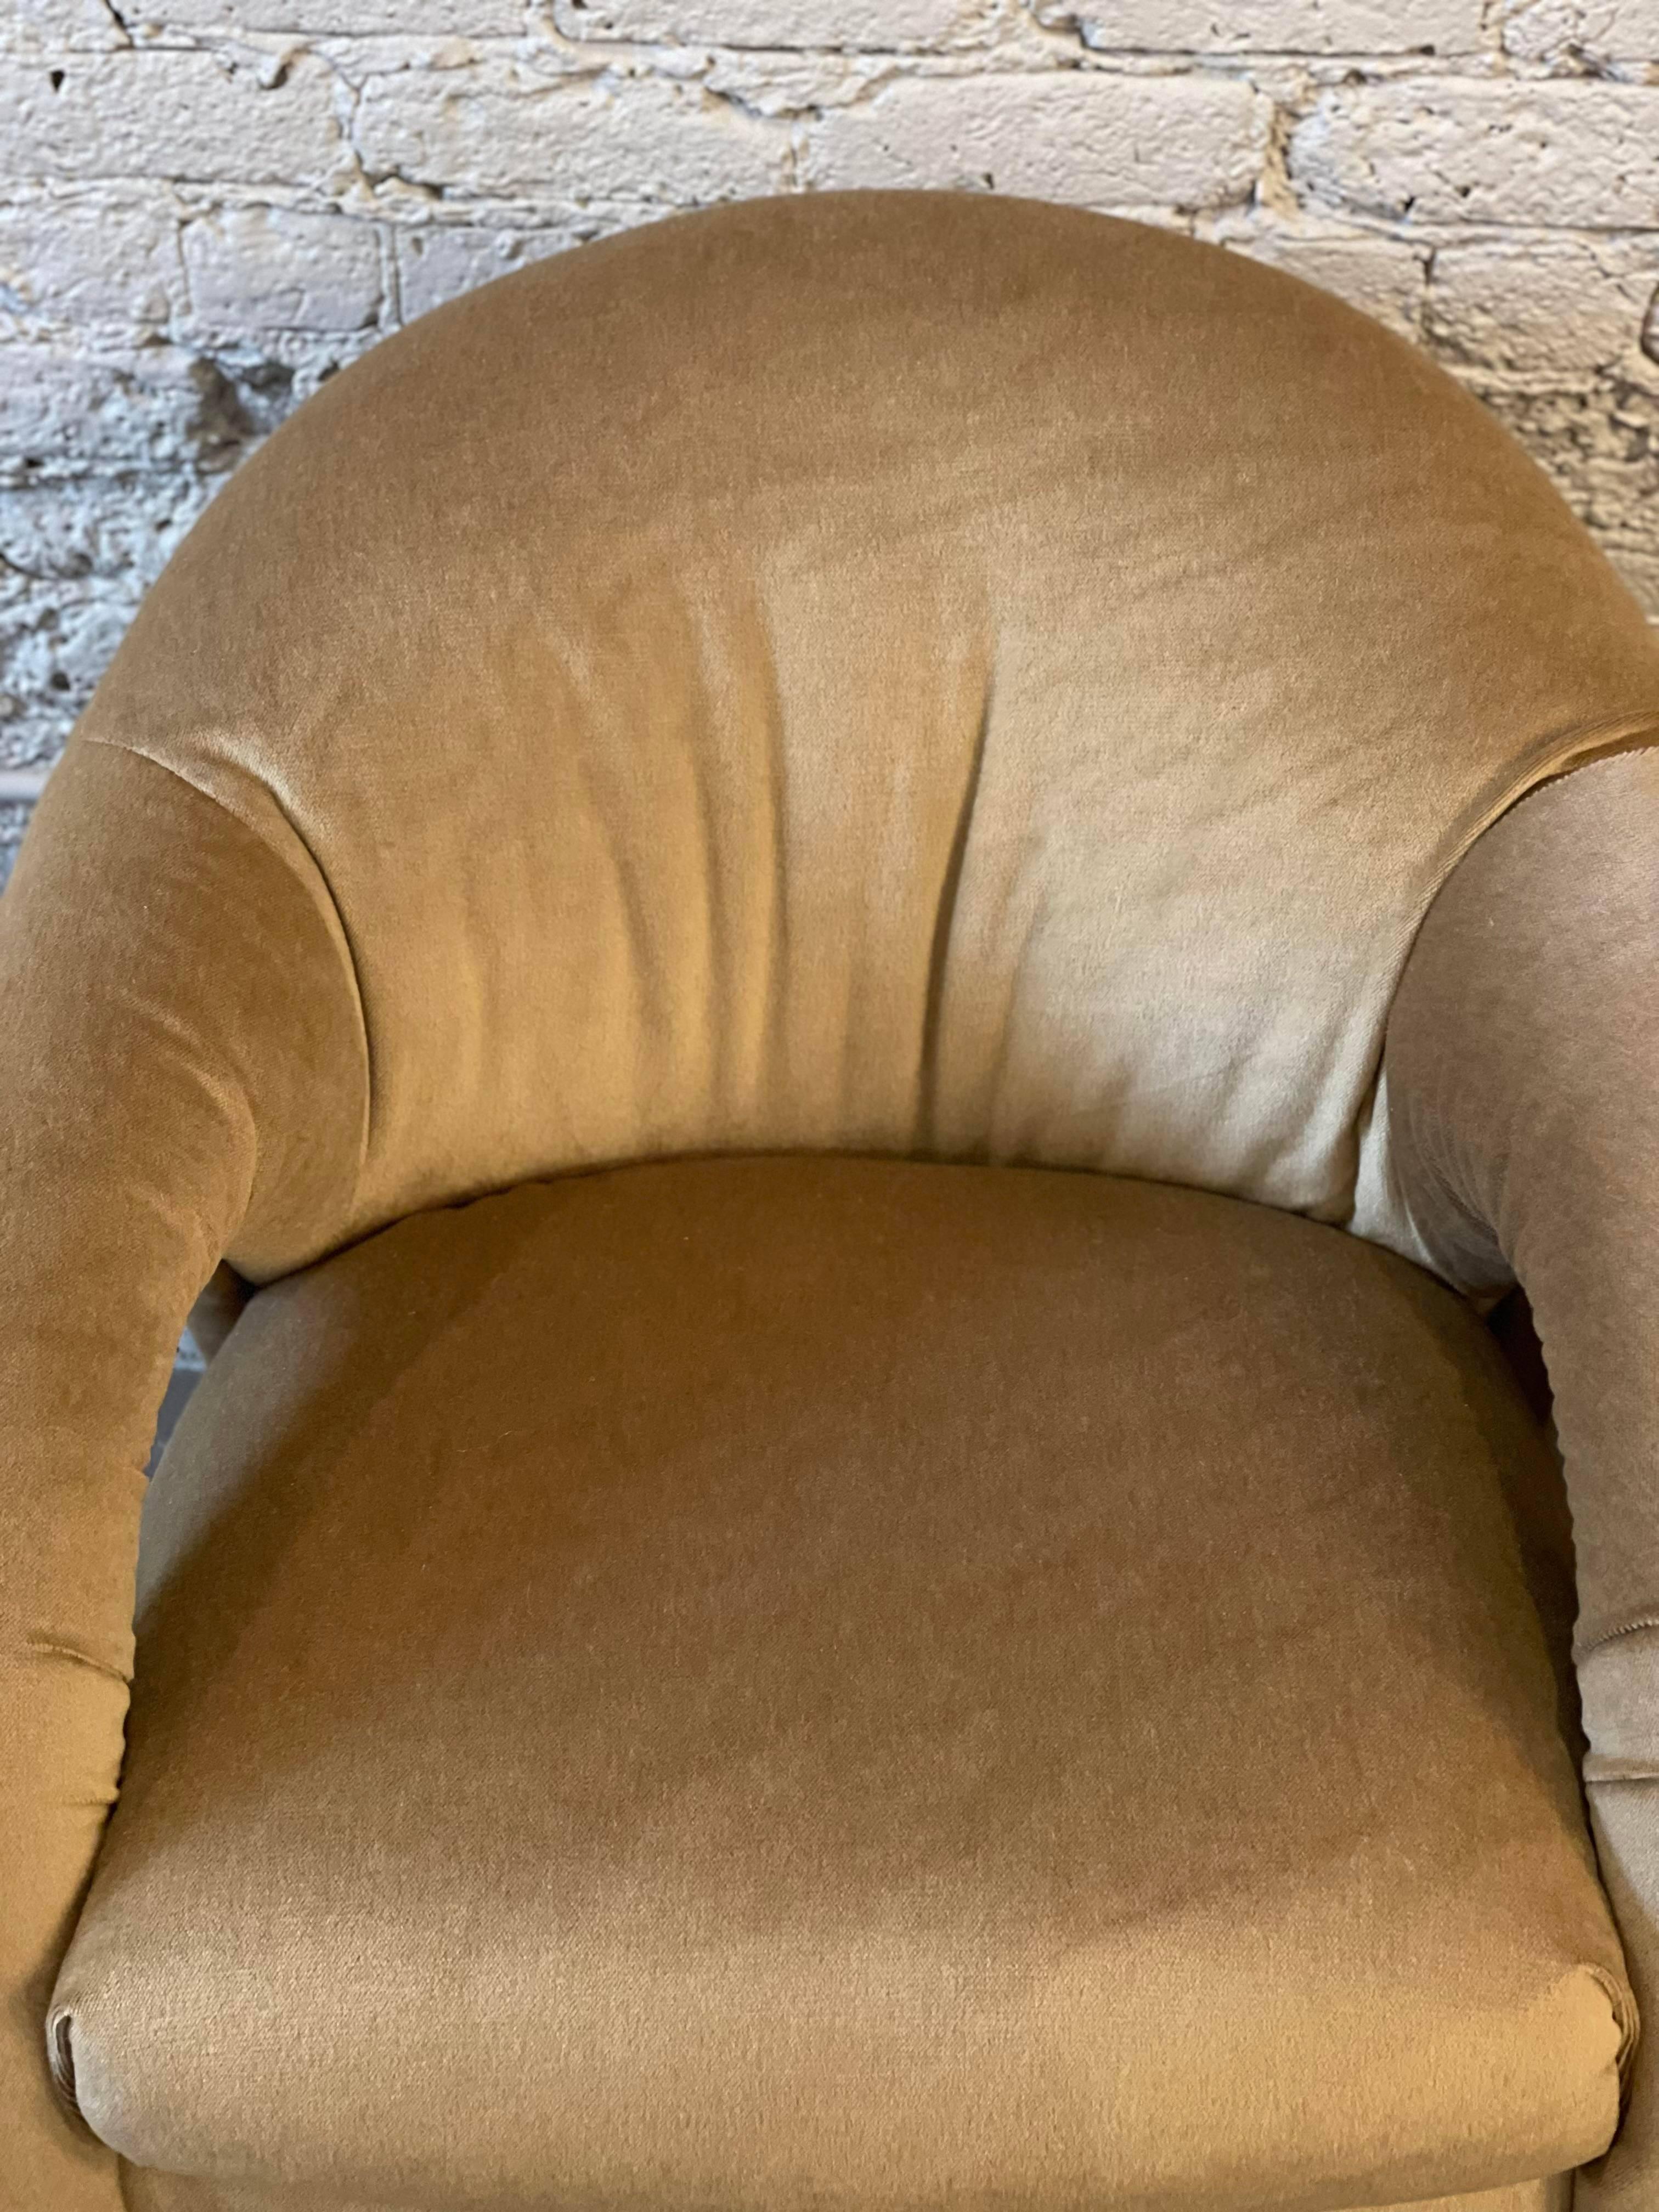 20th Century 1980s Postmodern Arc Sculptural Chairs in Camel Mohair, a Pair For Sale